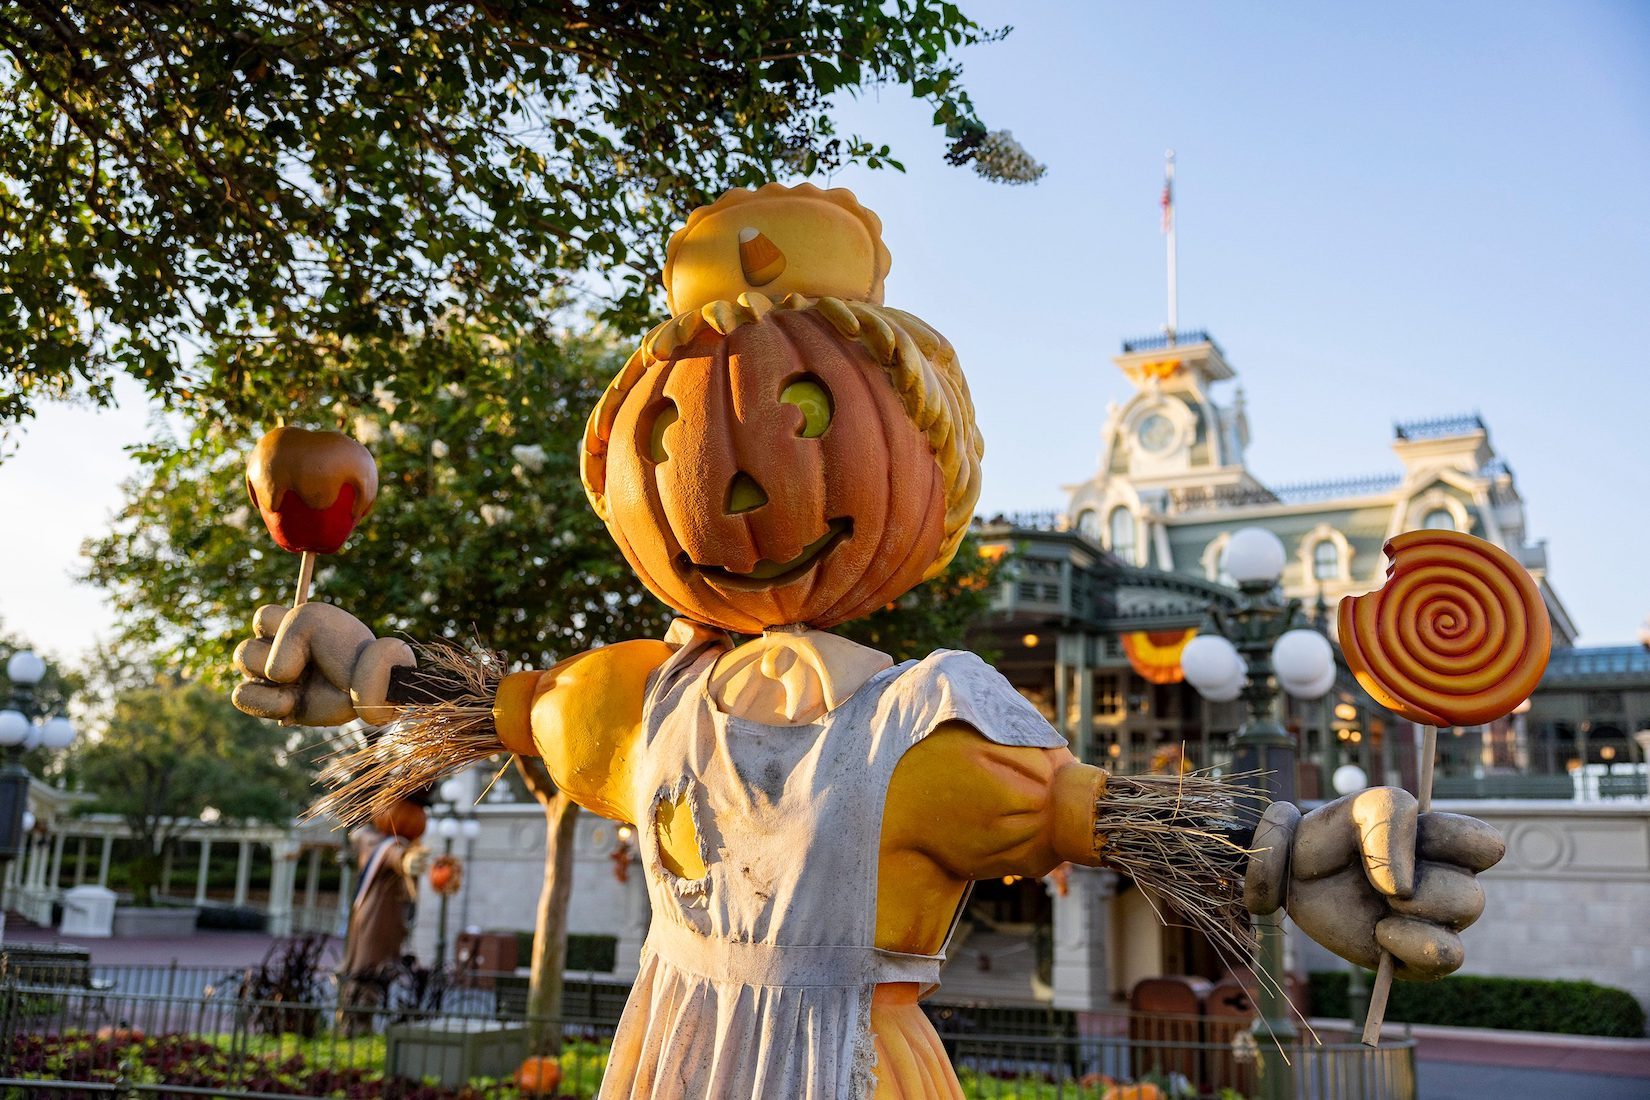 How to Plan Your Disney World Halloween Trip, According to the Experts